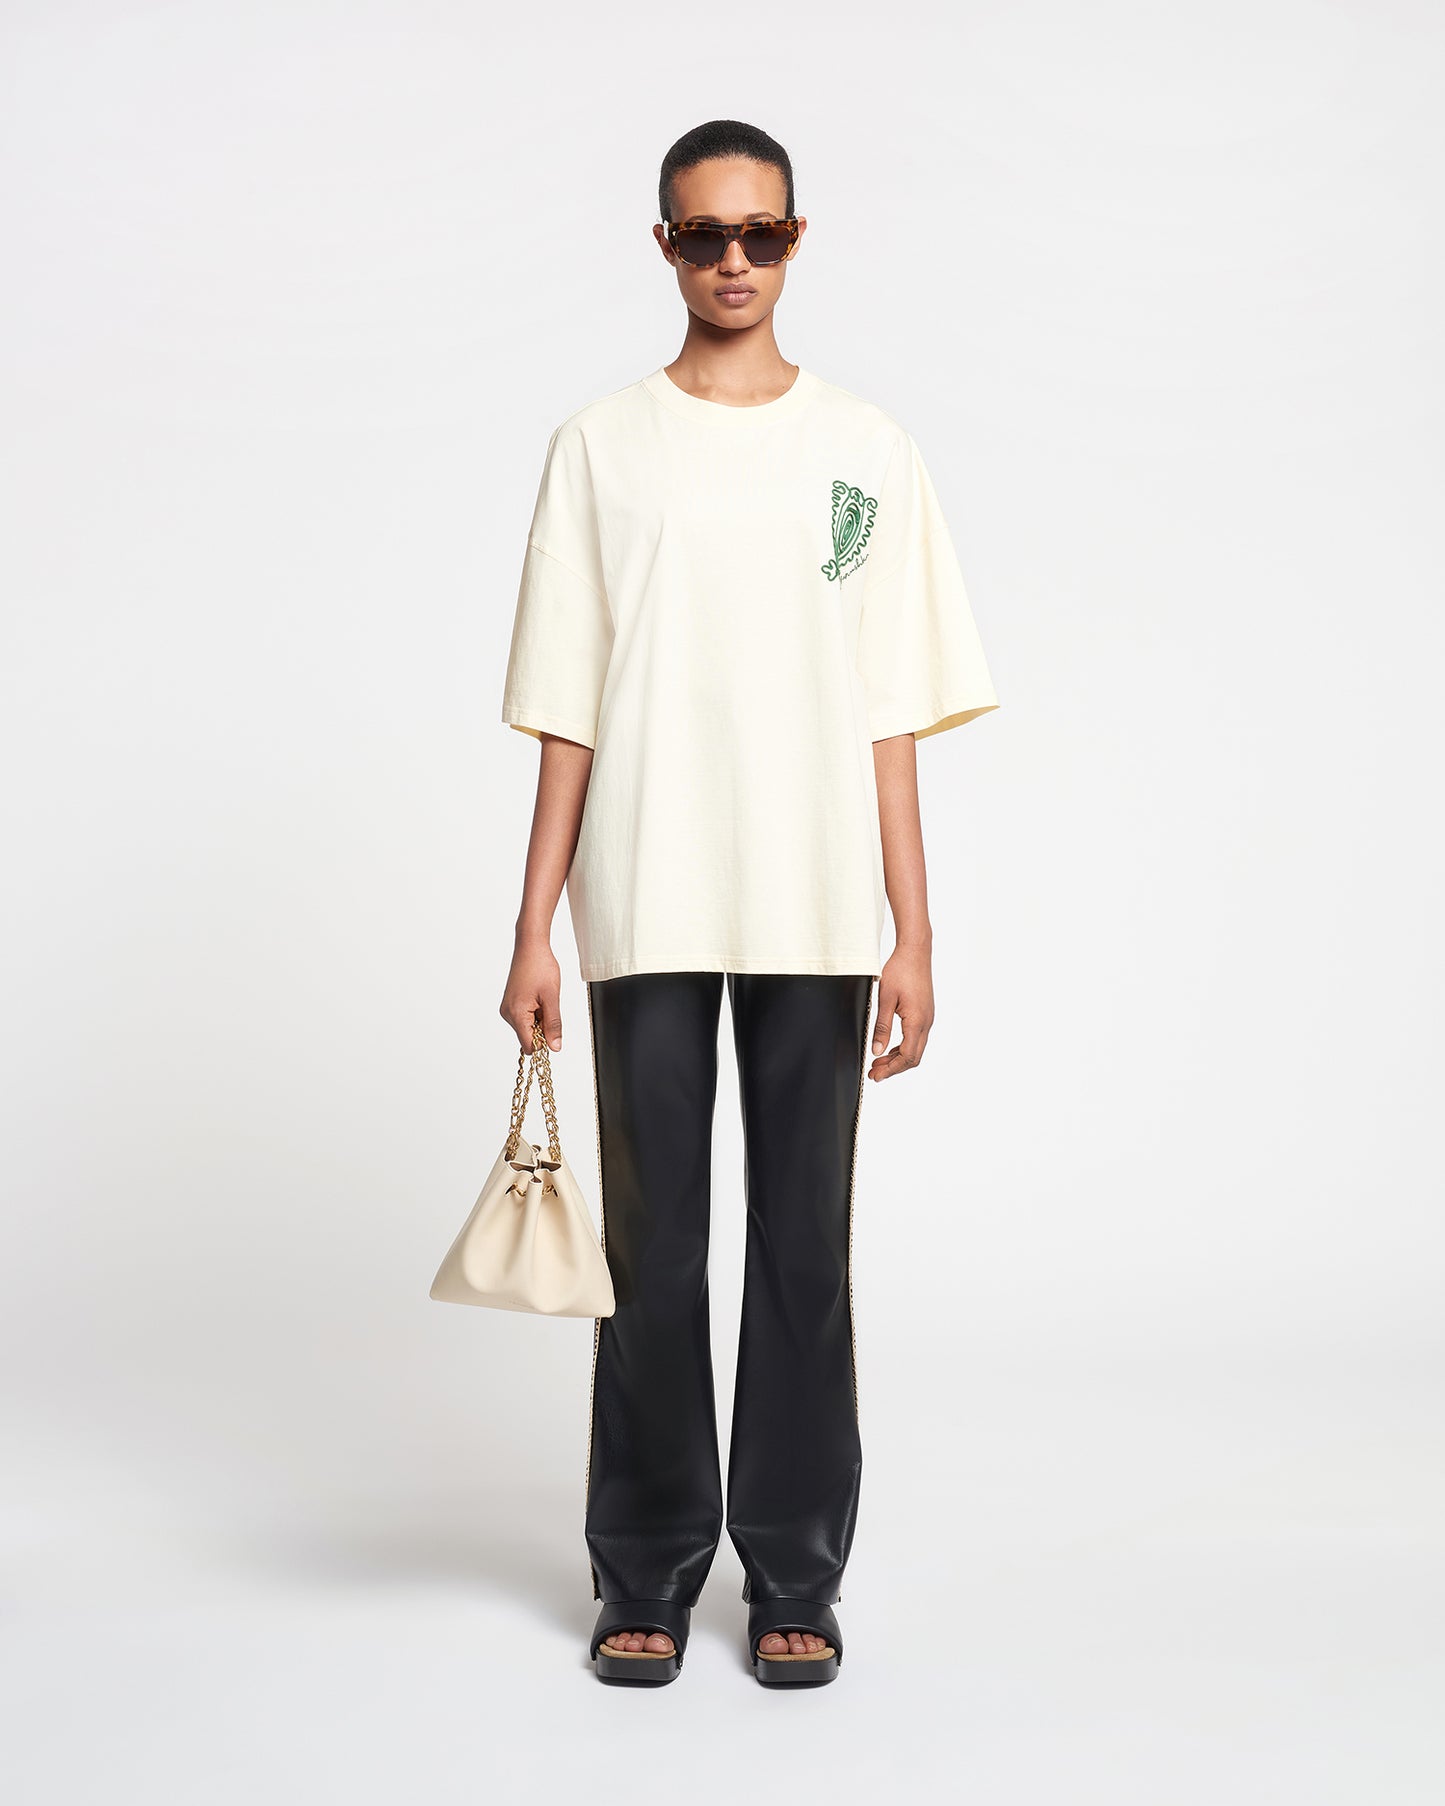 Wren - Small Embroidered Cotton-Jersey T-Shirt - Creme/Green